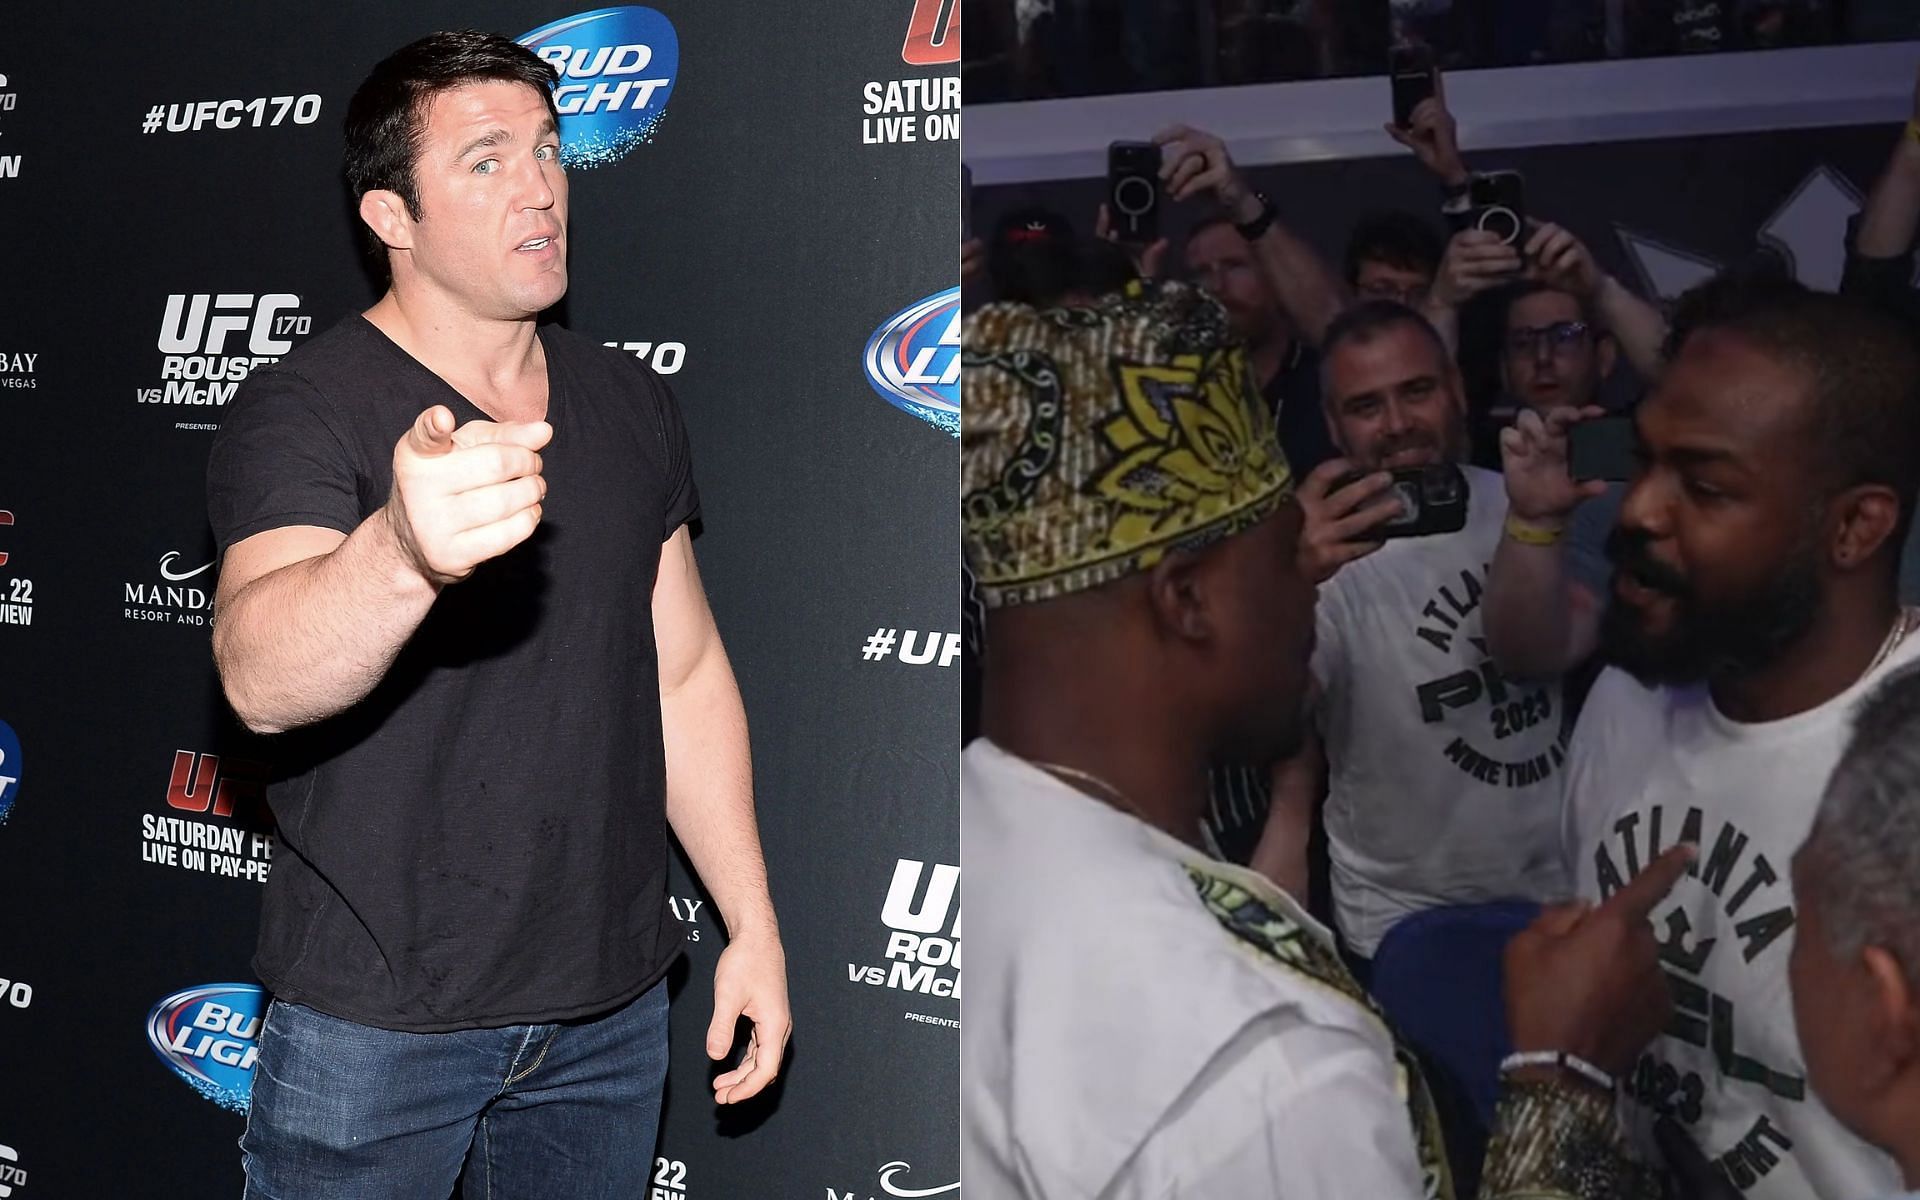 Chael Sonnen had an interesting viewpoint on the Jon Jones/Francis Ngannou face-off [Image Credit: Getty &amp; twitter.com/pflmma]